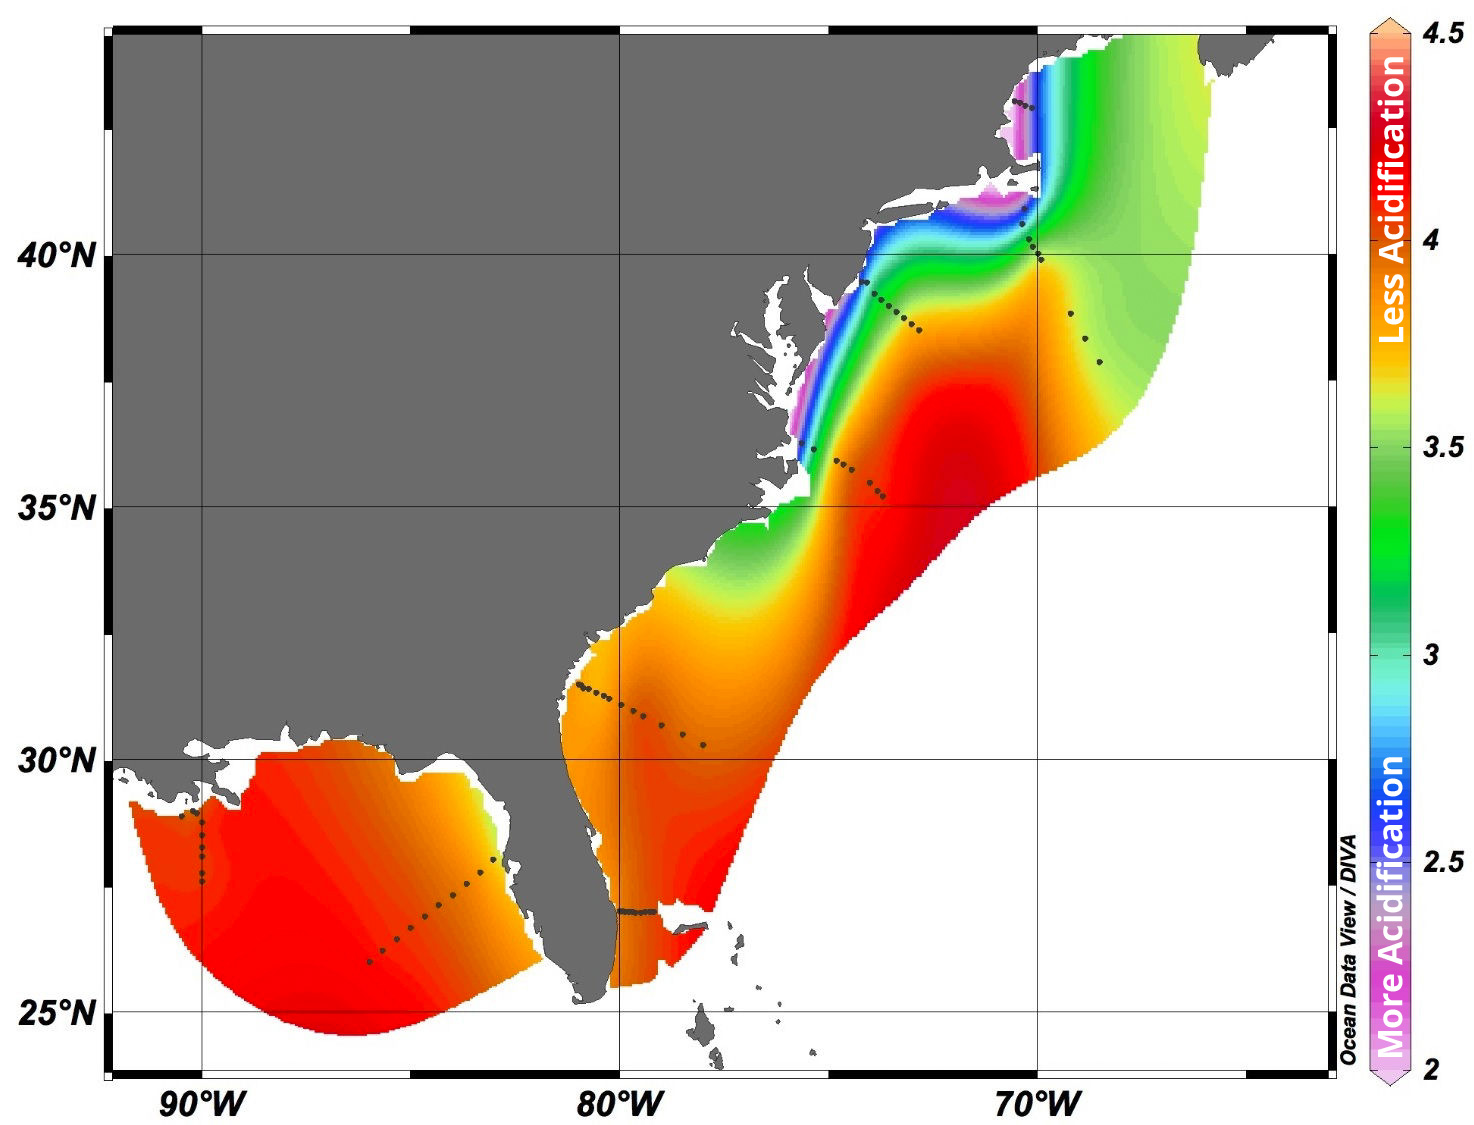 Aragonite saturation state as an indicator of ocean acidification (NOAA)